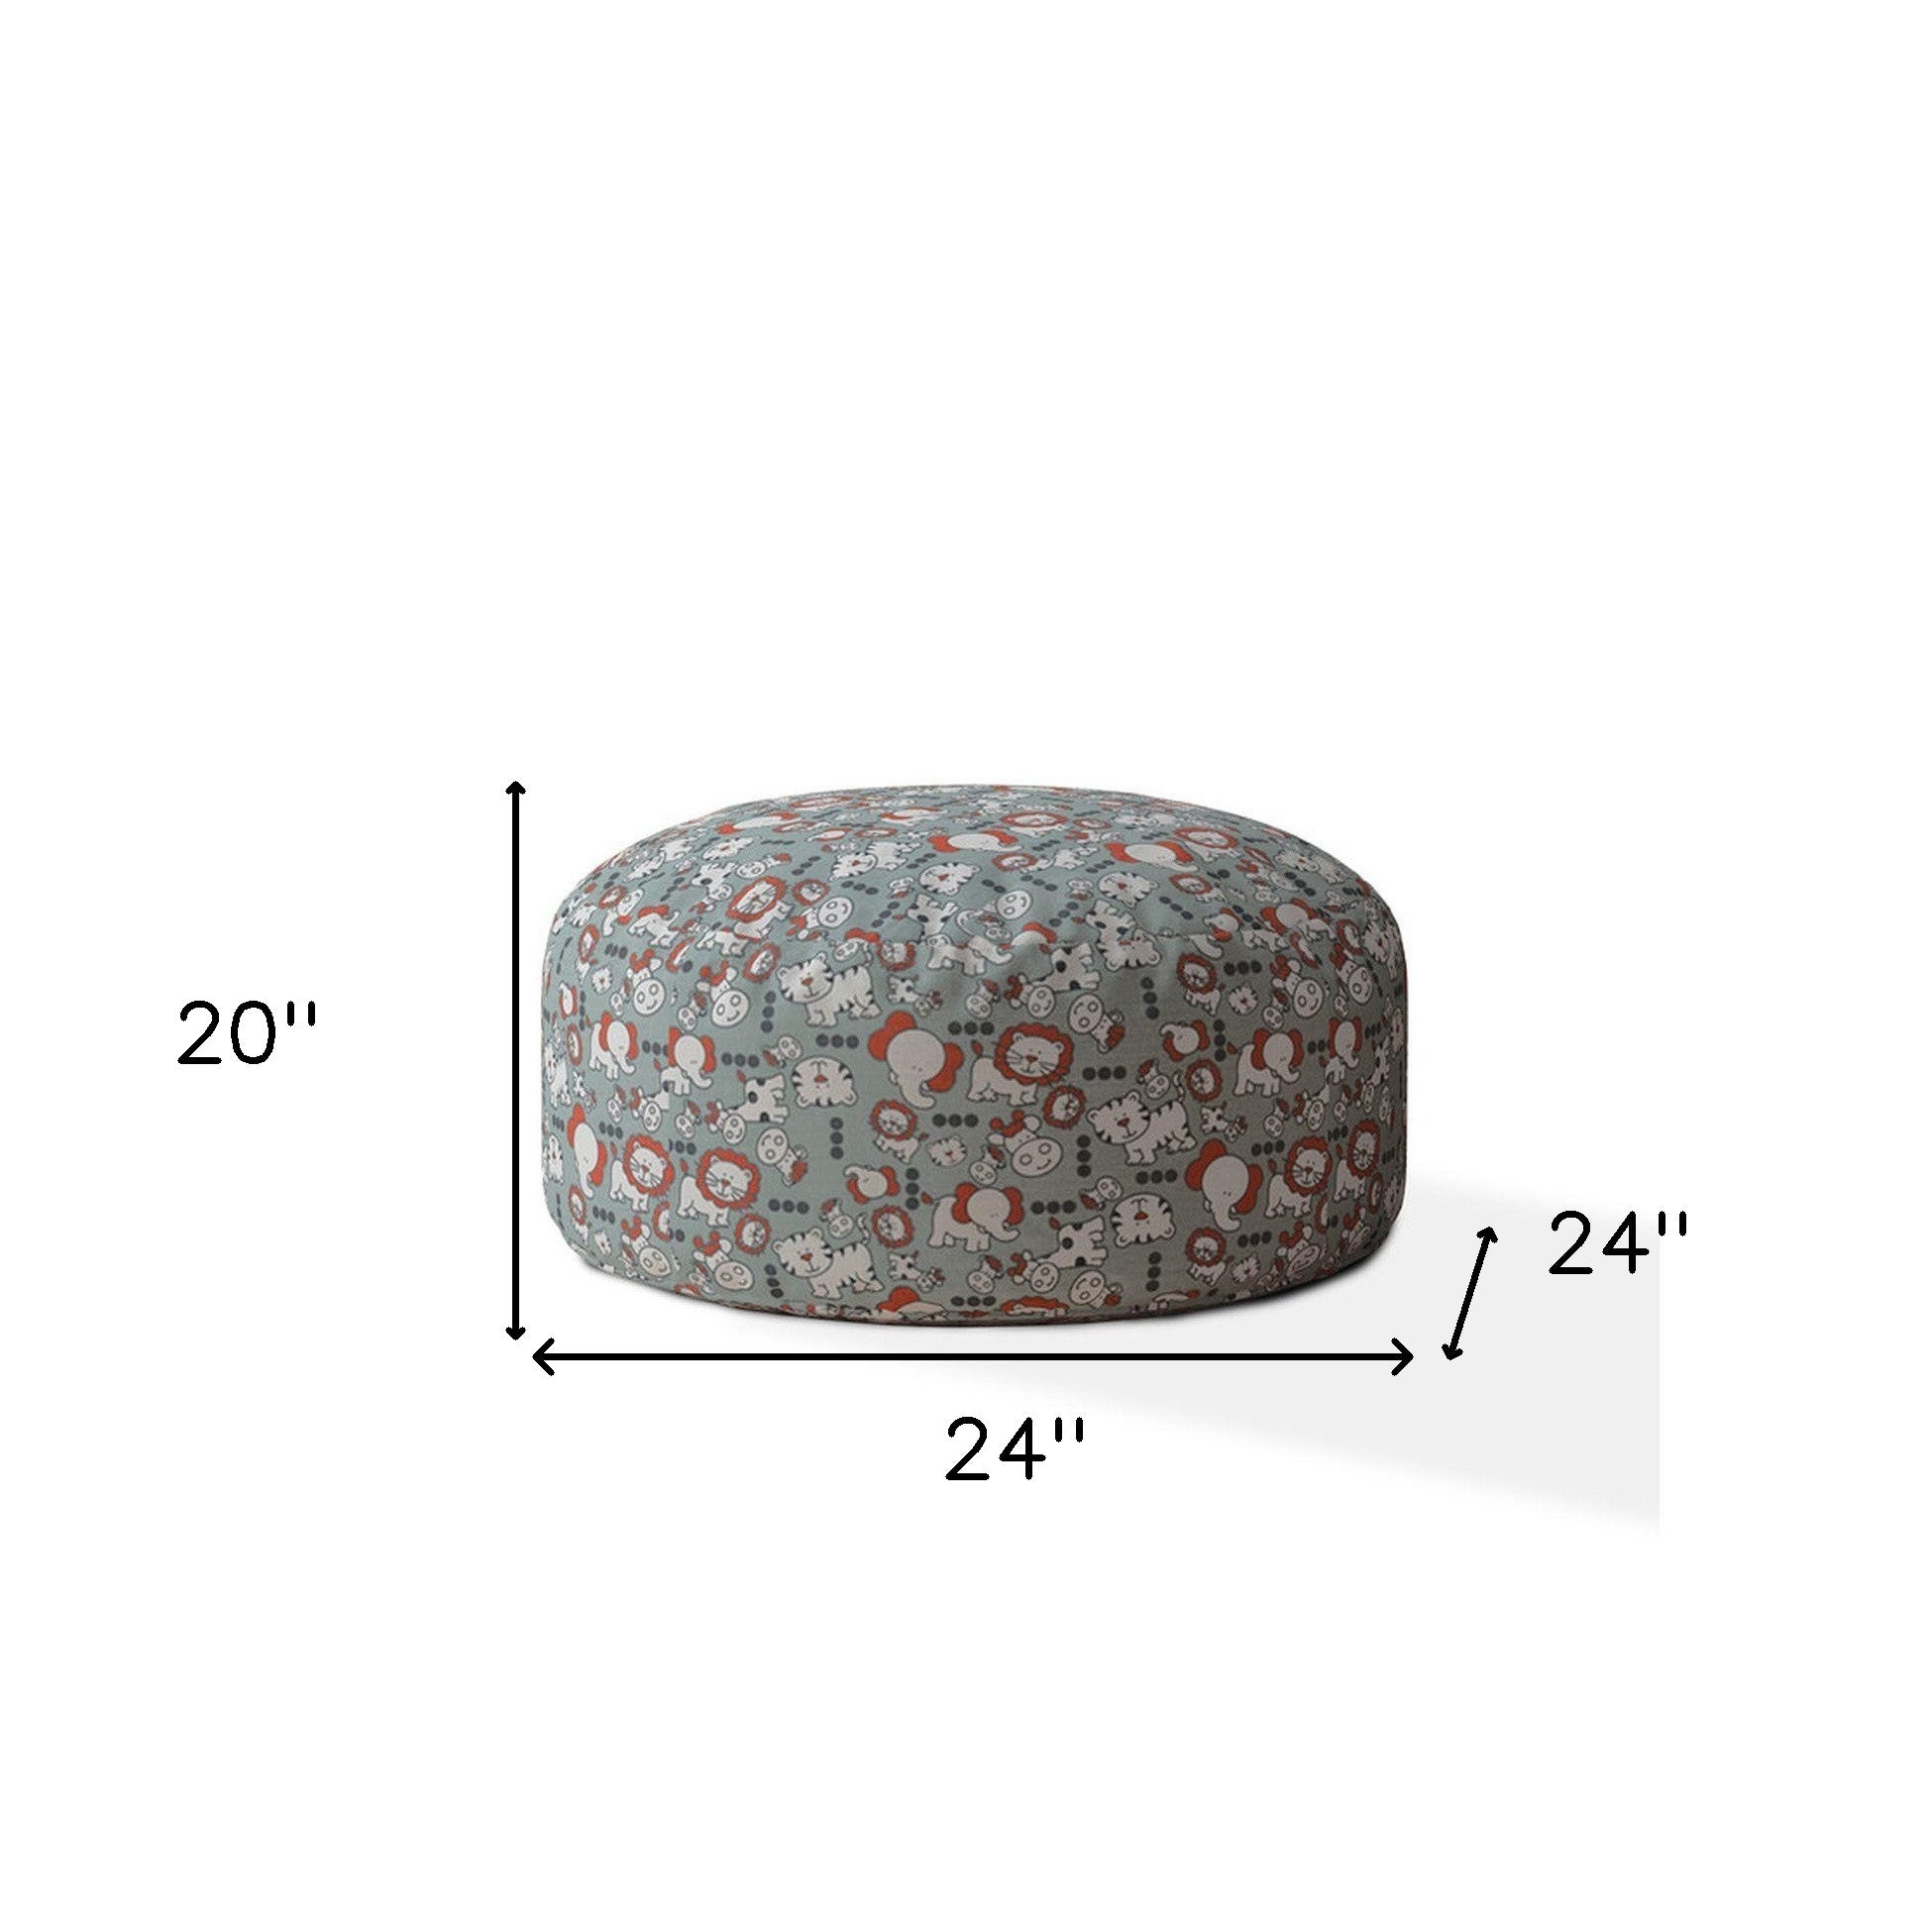 24" Gray And White Cotton Round Animal Print Pouf Cover